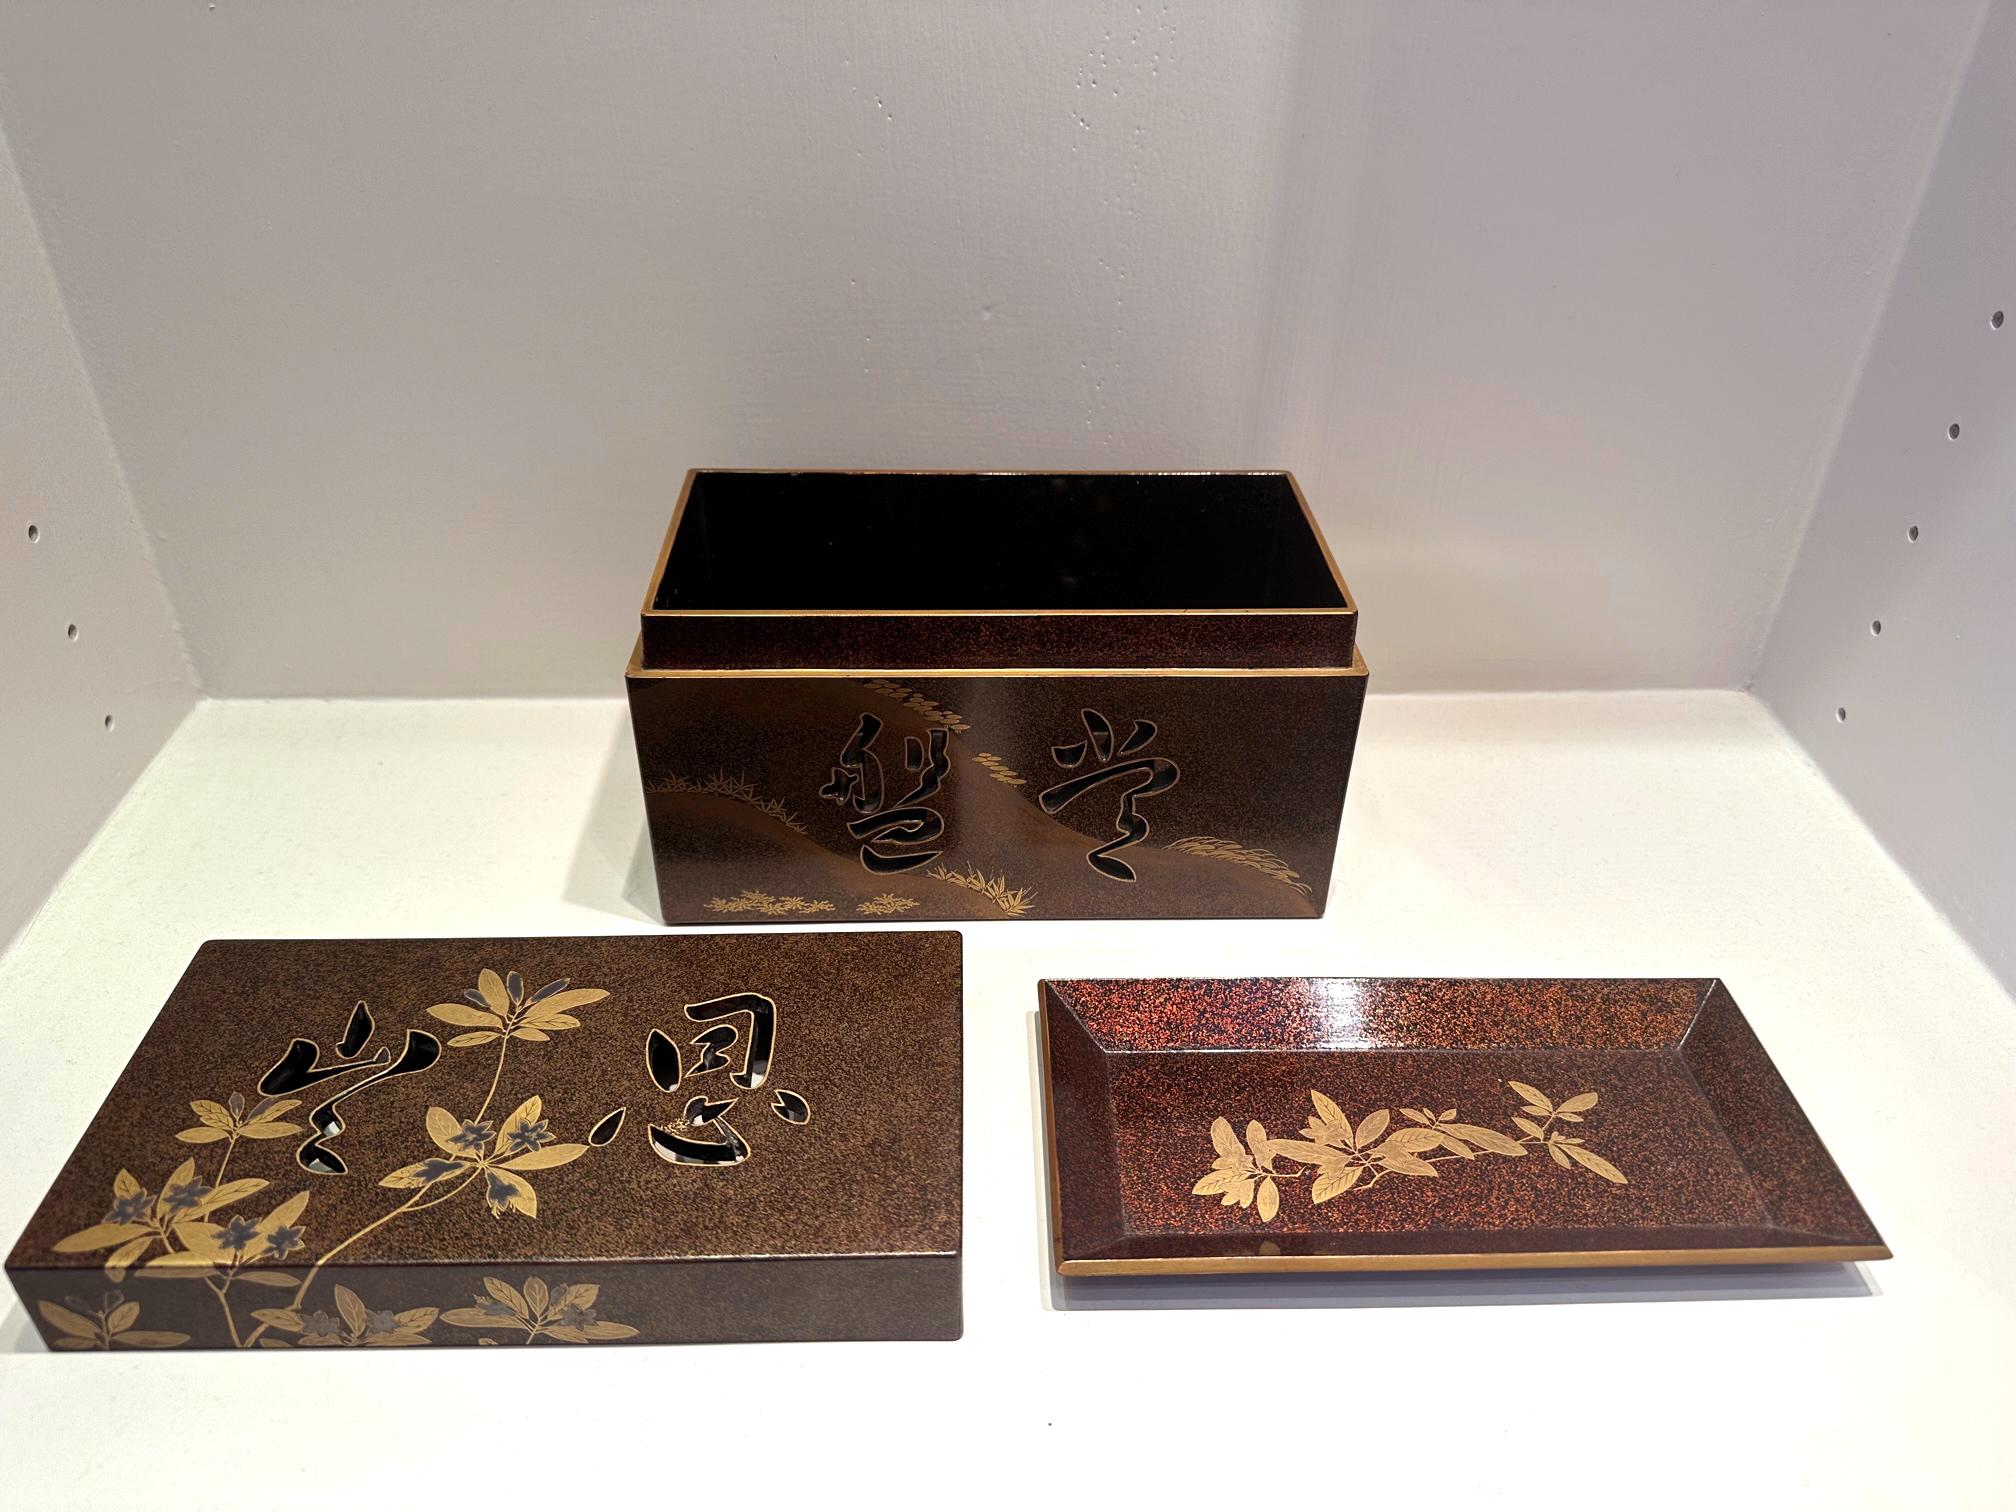 A Japanese lacquer box with lid and an inner tray decorated with Maki-e on a dense nashiji background. The fine box was likely made circa 1920-30s during the Tashio period and likely used for tea ceremony. The low relief hiramaki-e depicts a gentle